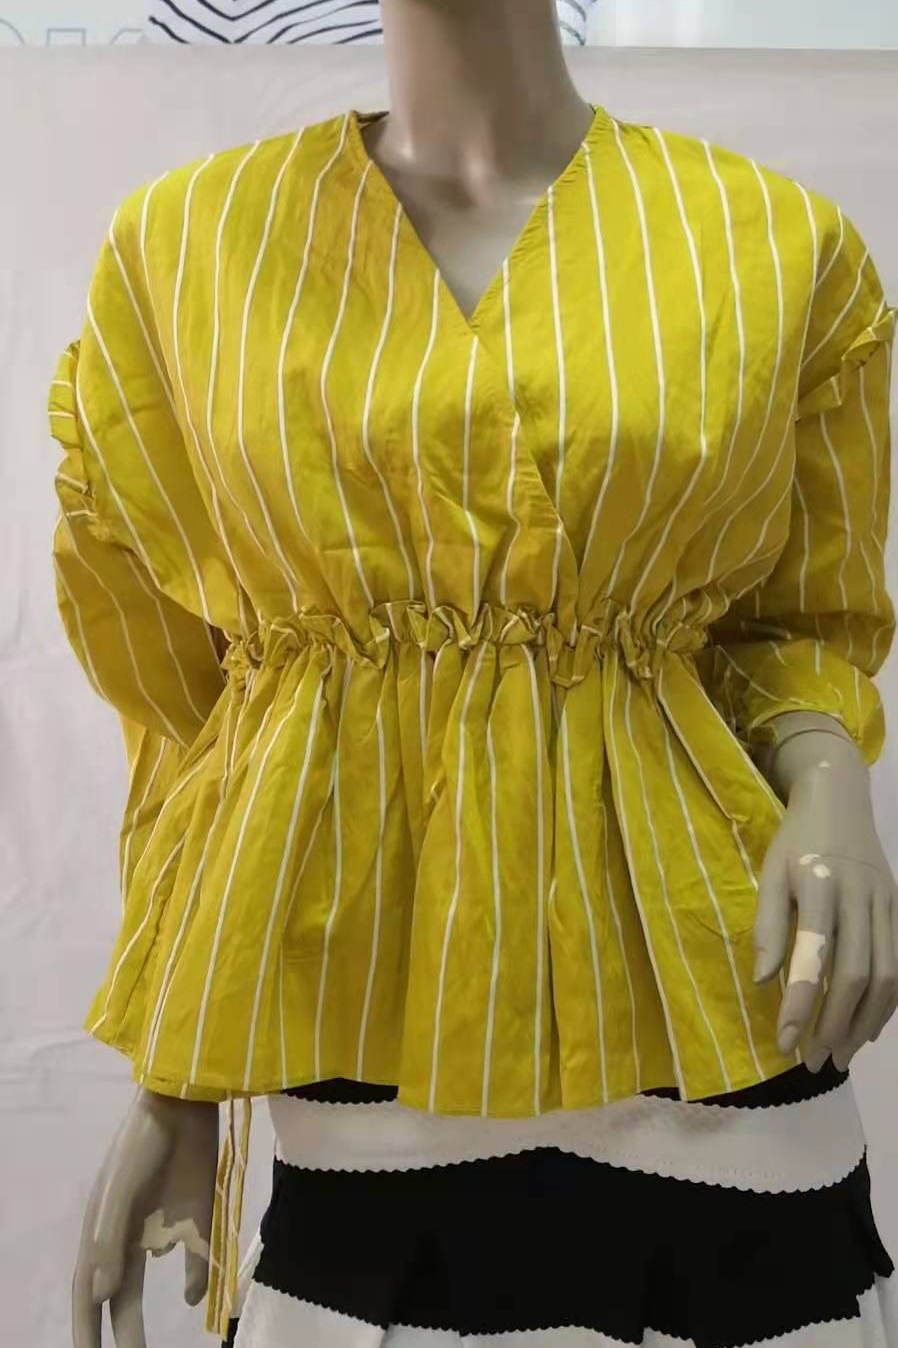 Yellow striped top